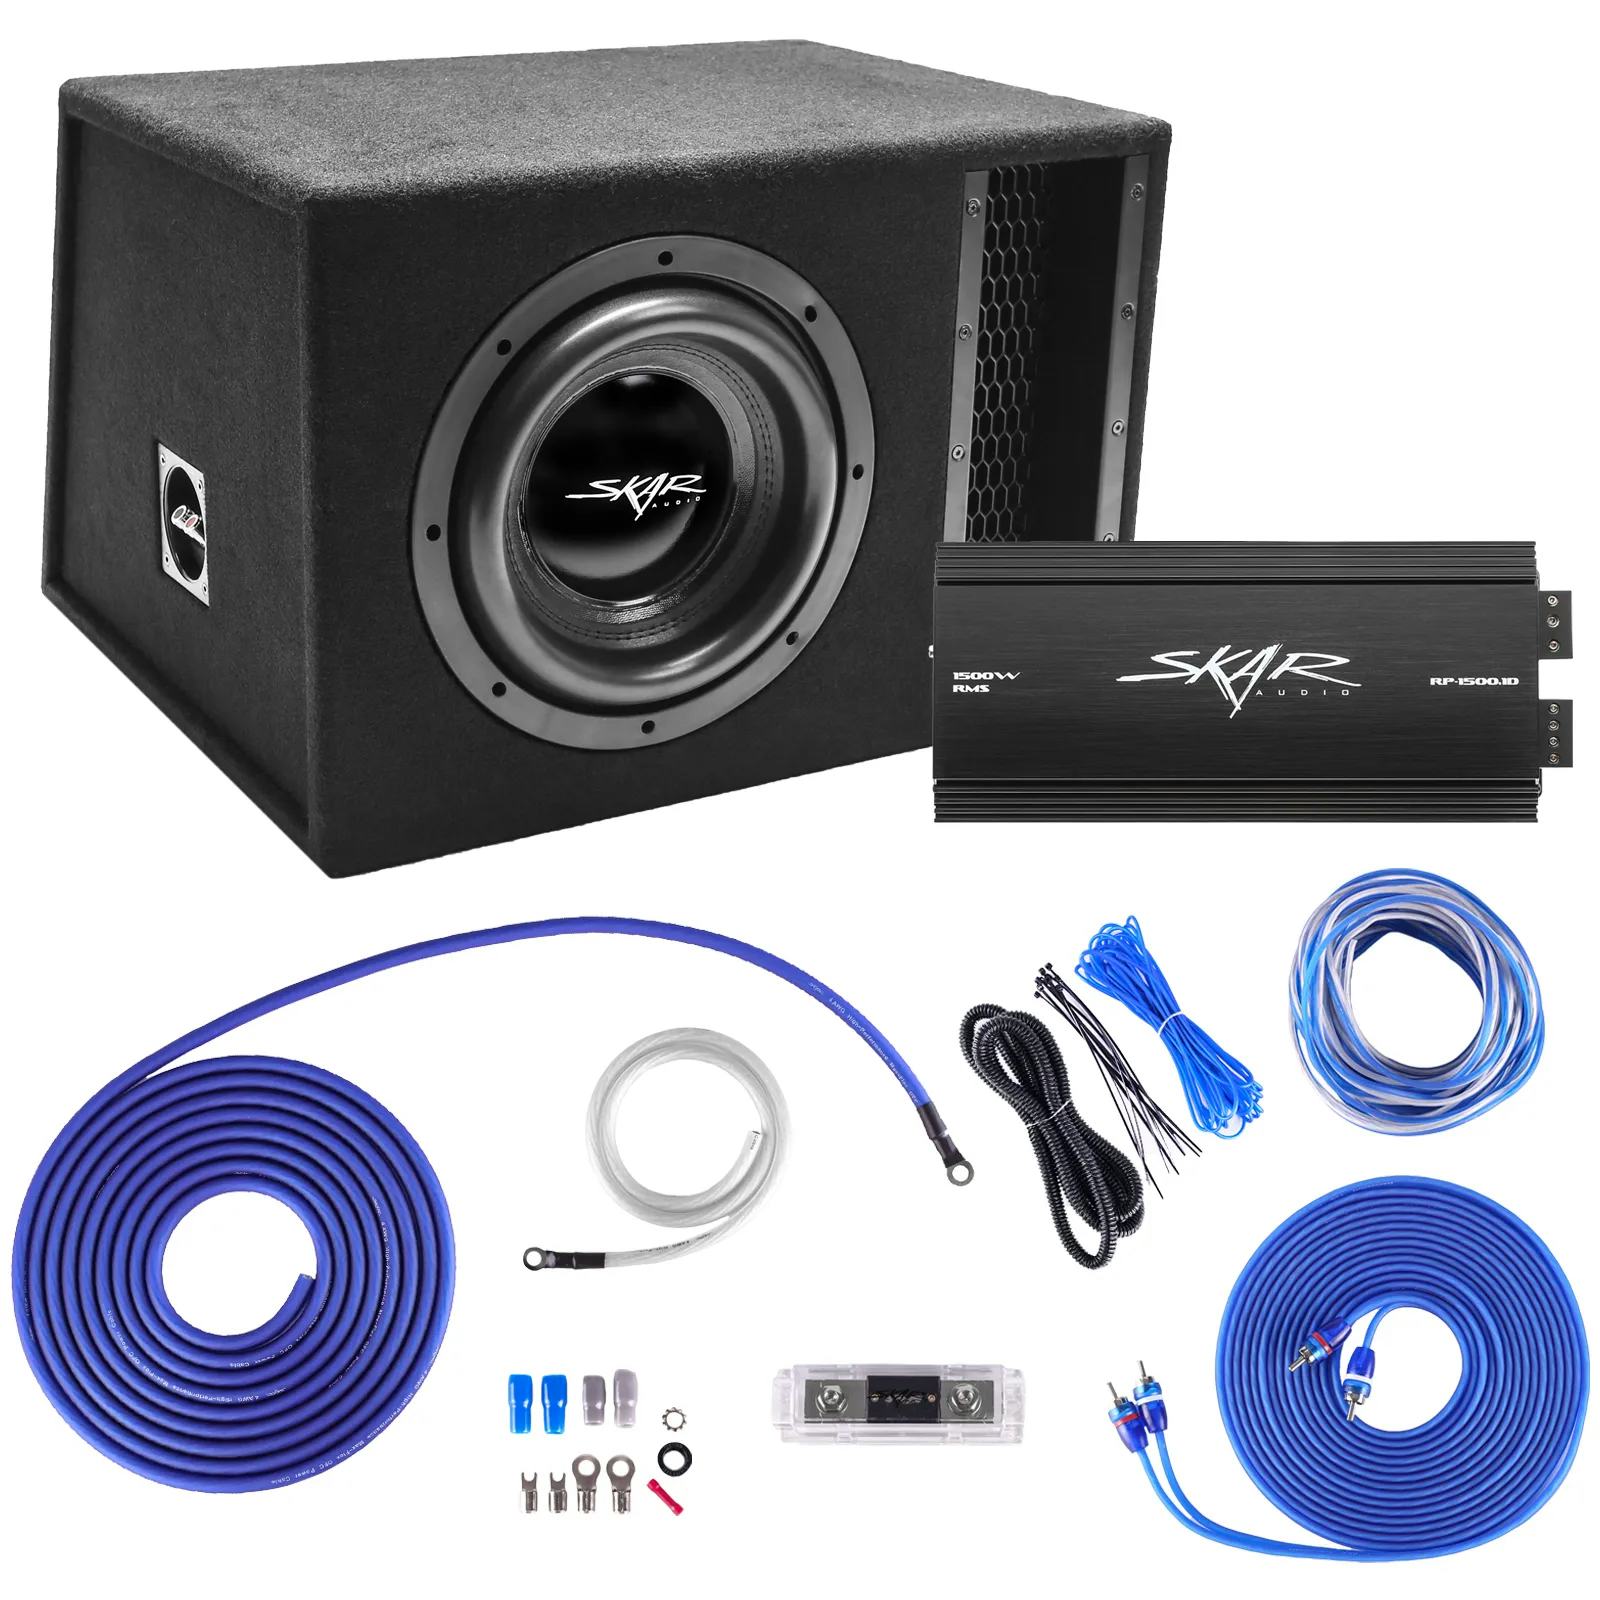 Single 10" 2,000 Watt EVL Series Complete Subwoofer Package with Vented Enclosure and Amplifier #1